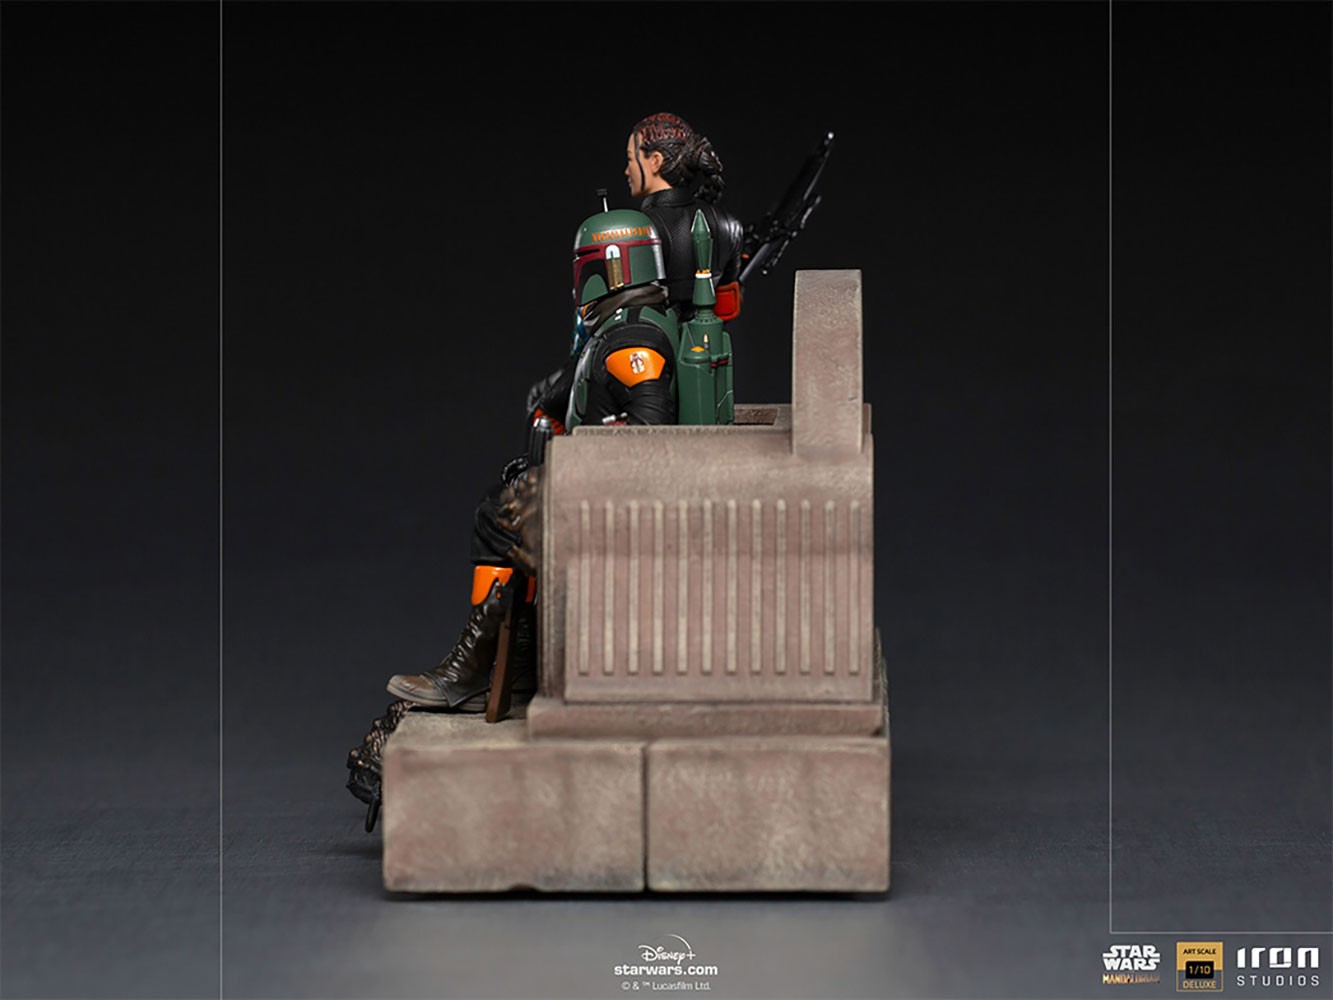 Boba Fett & Fennec Shand on Throne Deluxe- Prototype Shown